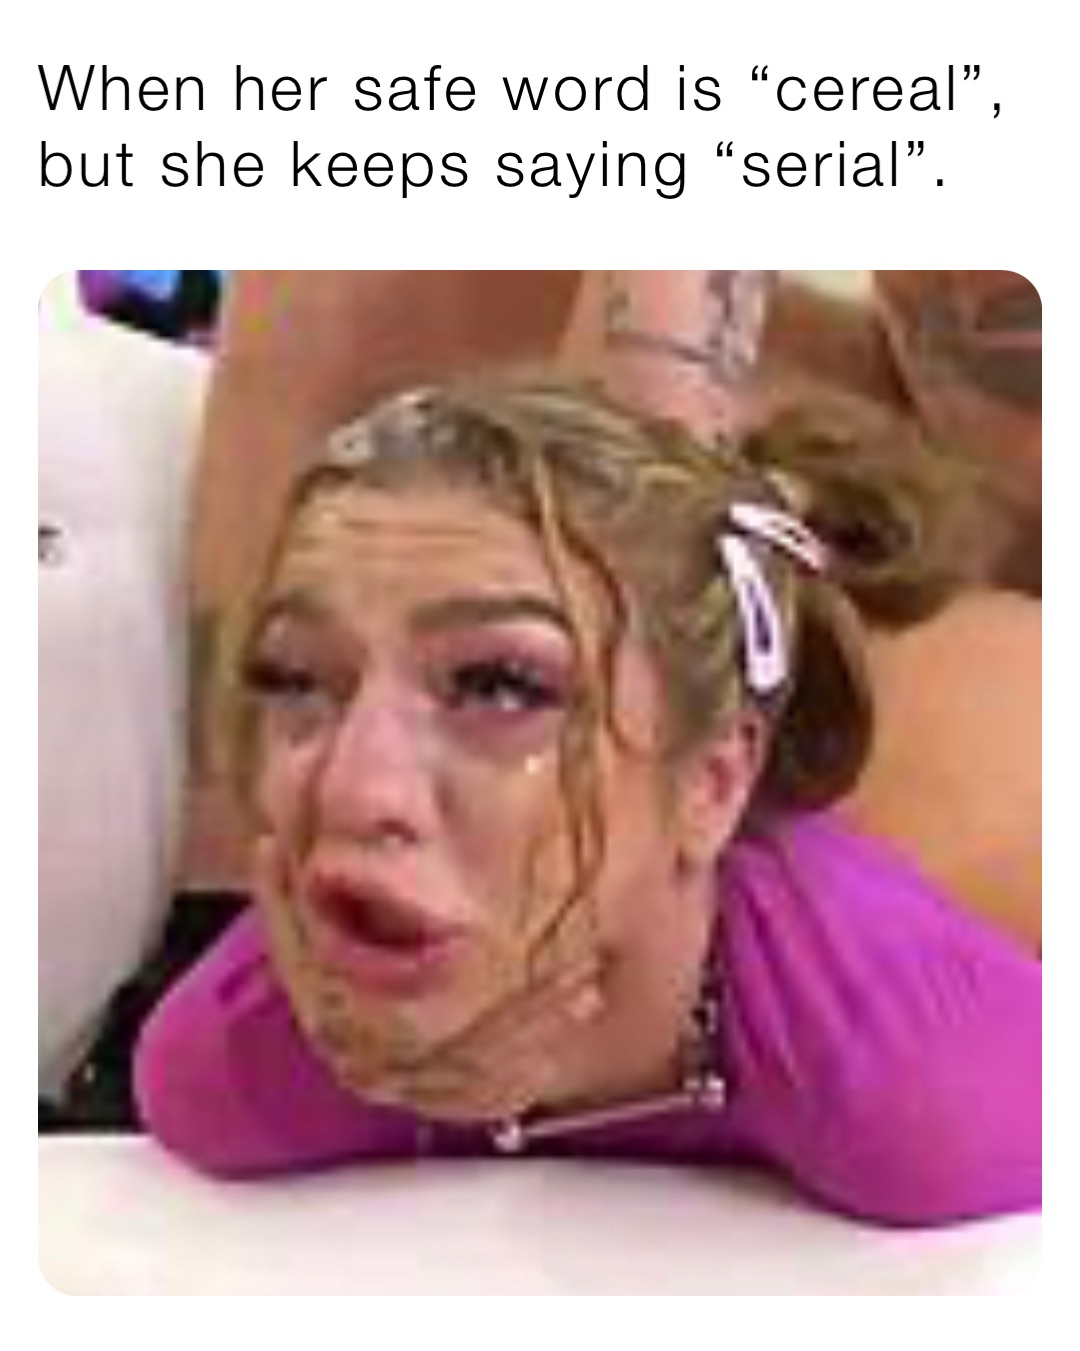 When her safe word is “cereal”, but she keeps saying “serial”.